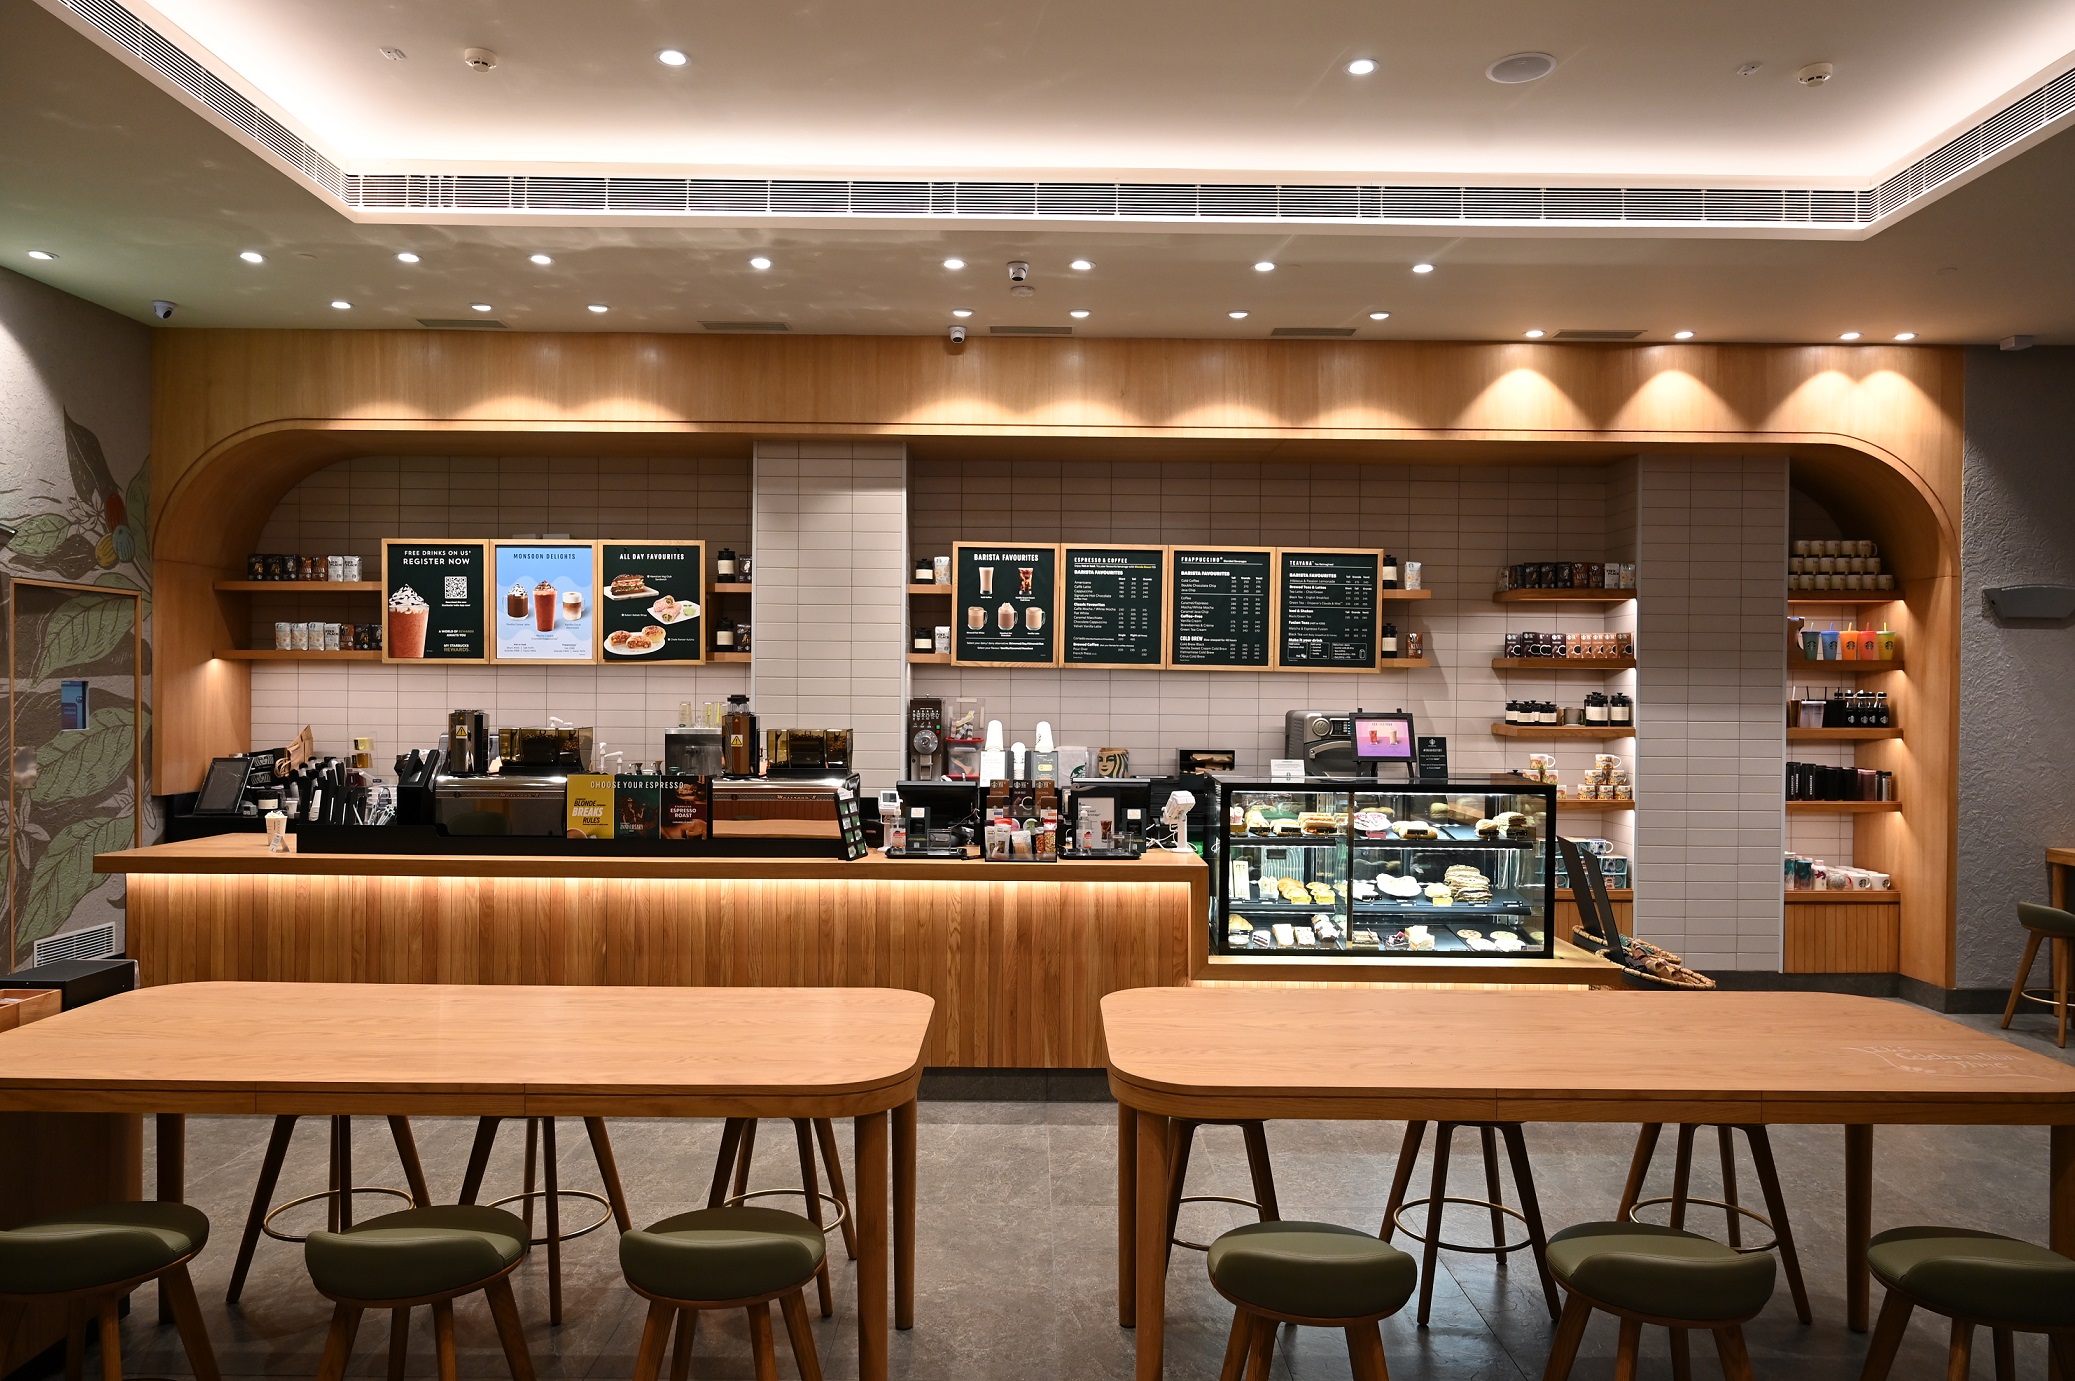 Tata Starbucks enters Rajasthan with two new stores in Jaipur